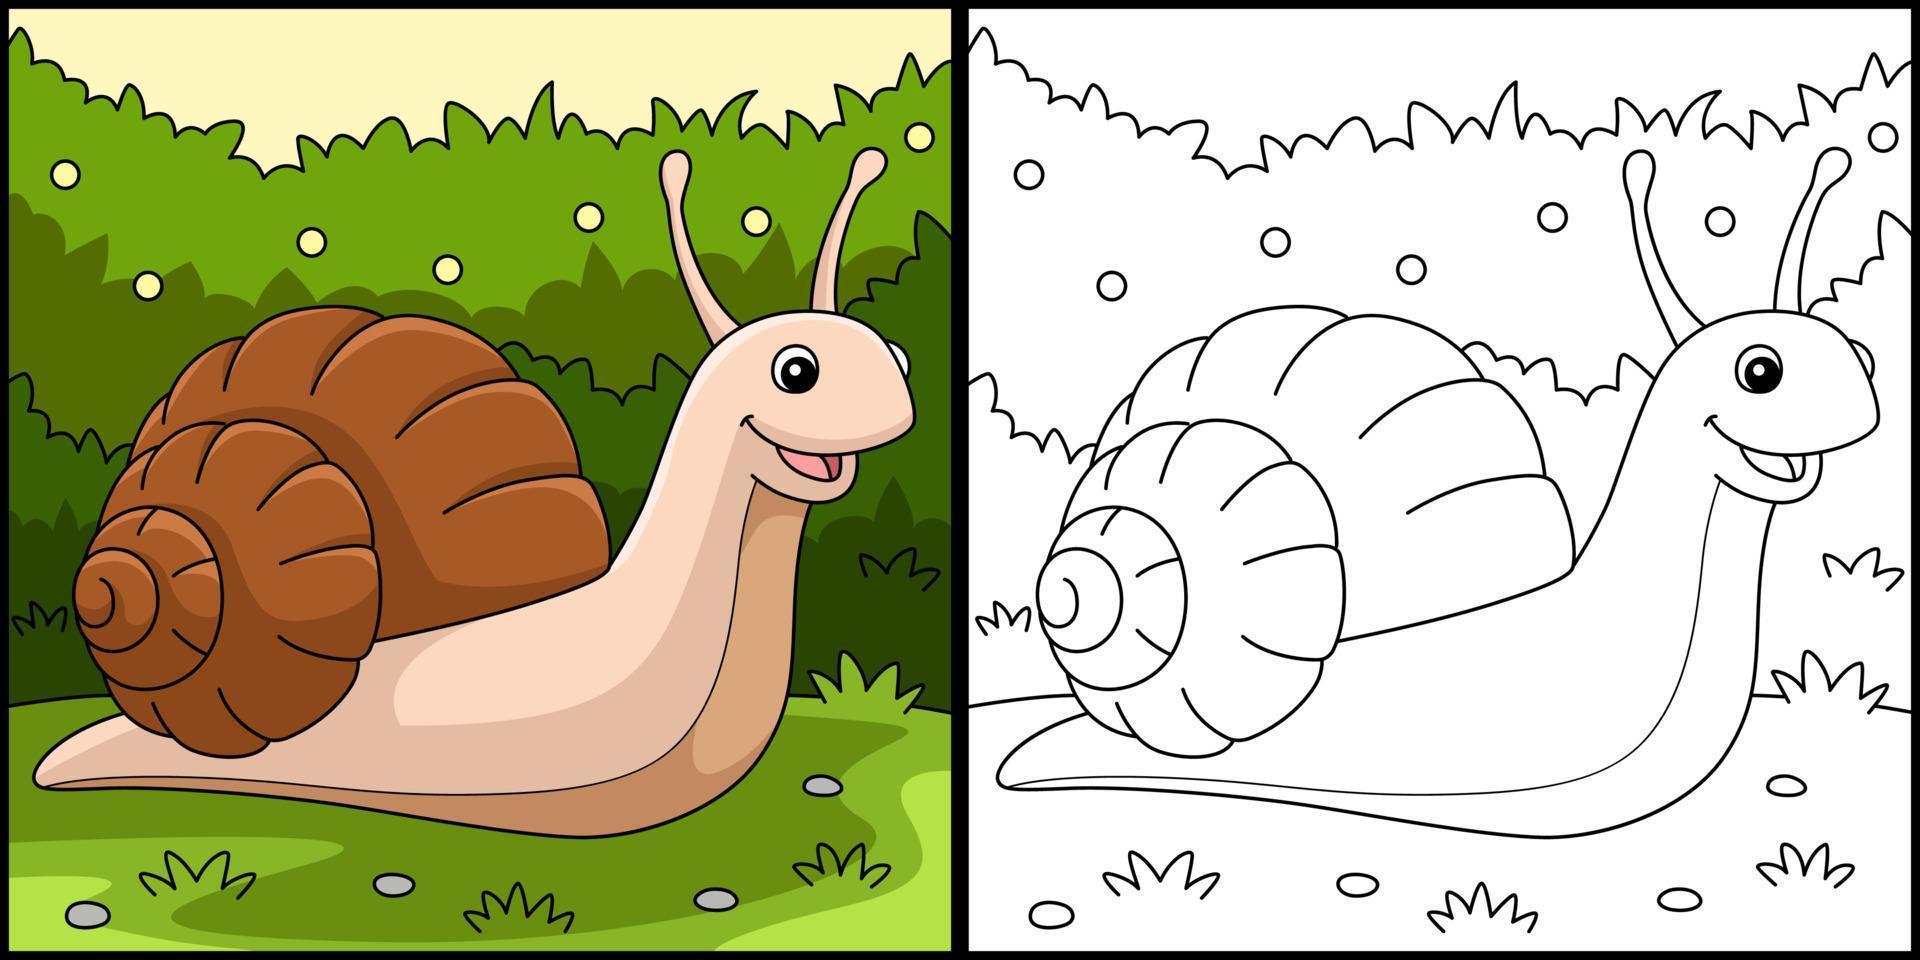 Snail Animal Coloring Page Colored Illustration vector